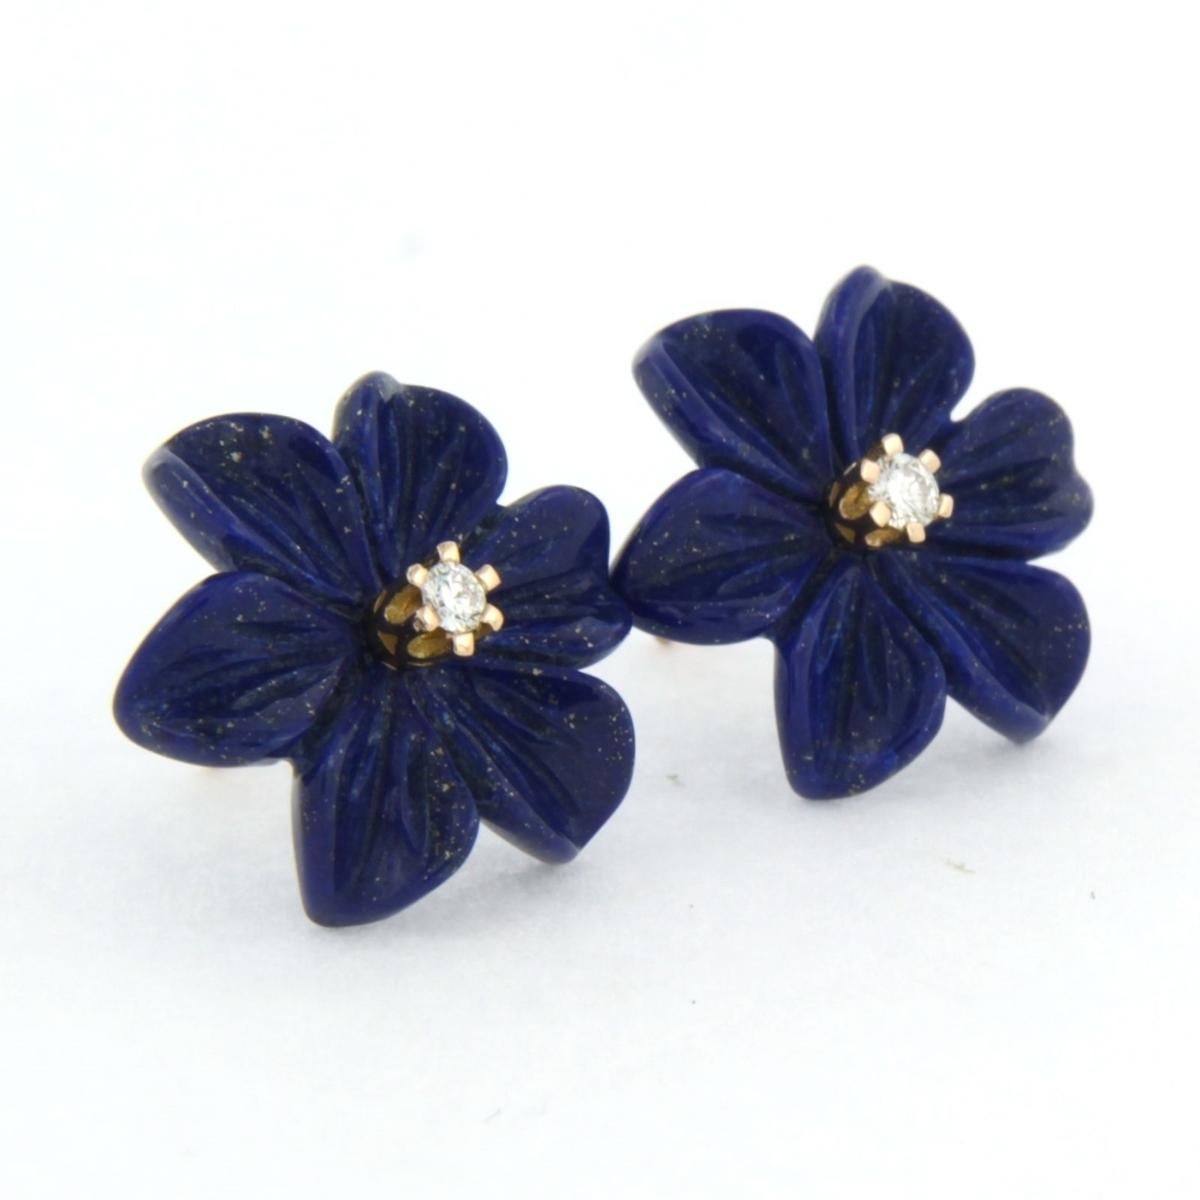 Brilliant Cut Earrings with flower shaped lapis lazuli and diamonds 18k pink gold